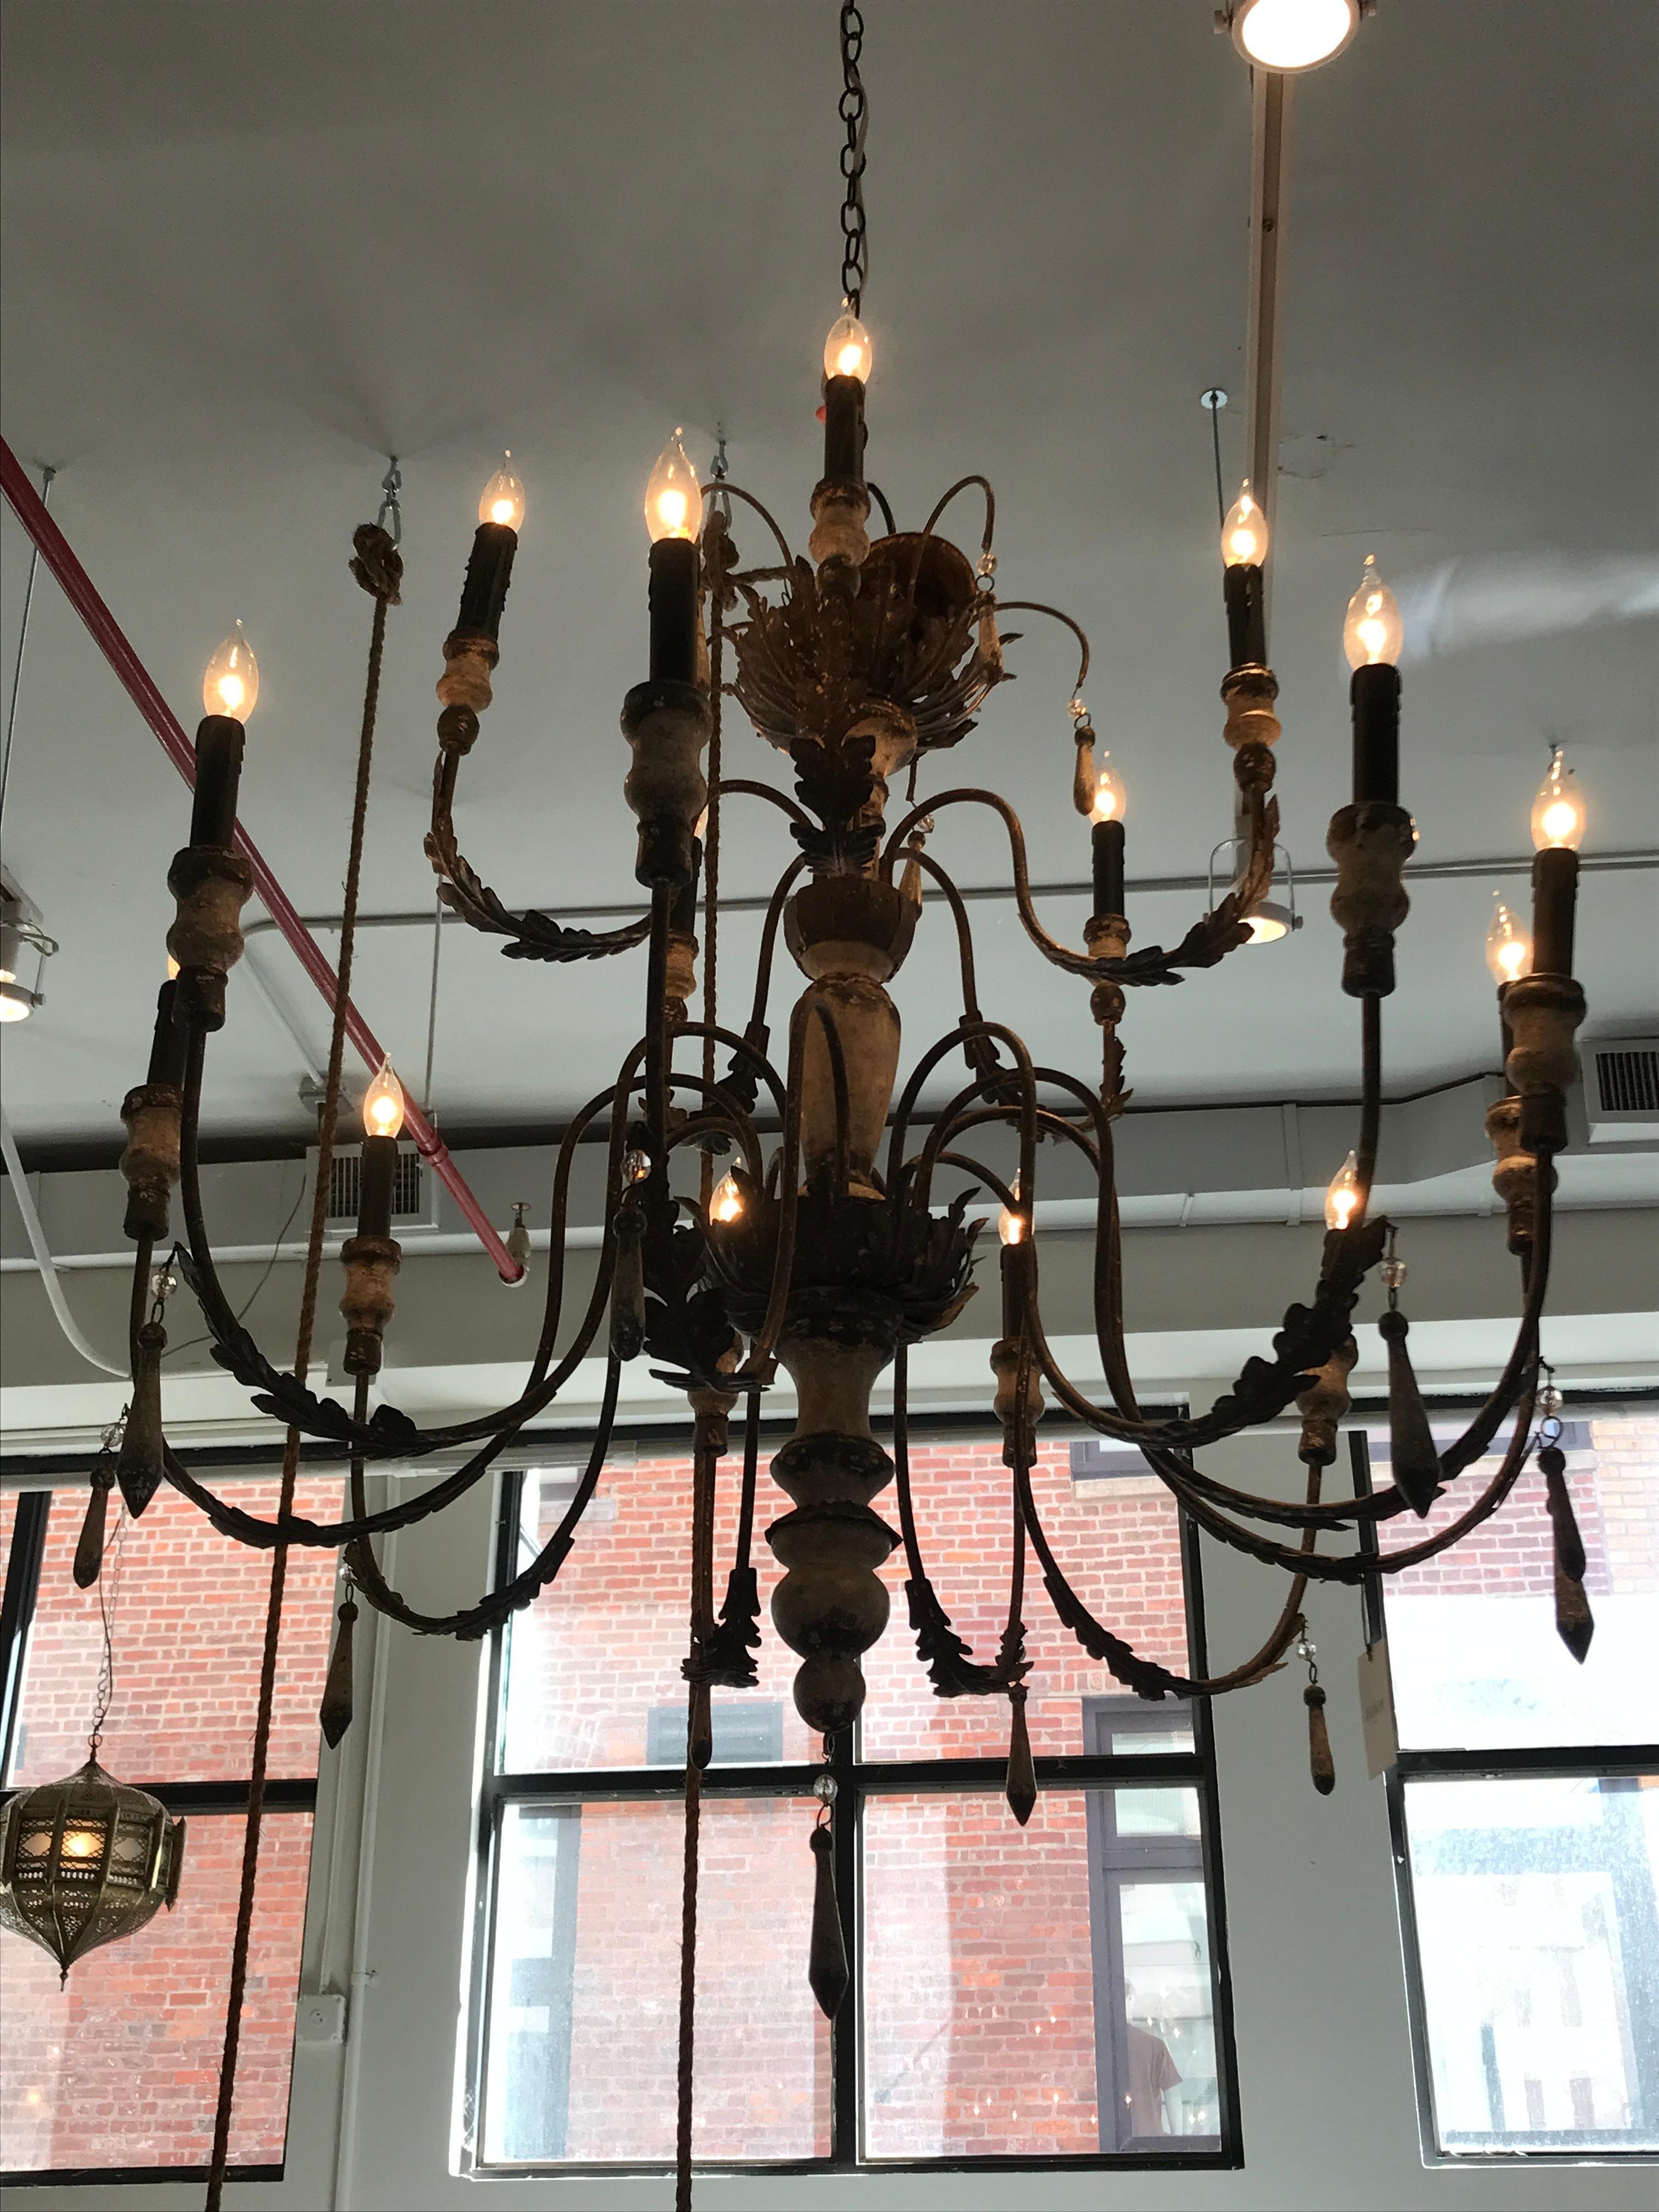 A timeless vintage European chandelier with an exquisite patina that wraps the bronze arms. The contrasting color of patina and aged bronze will enrich any home with historic charm.